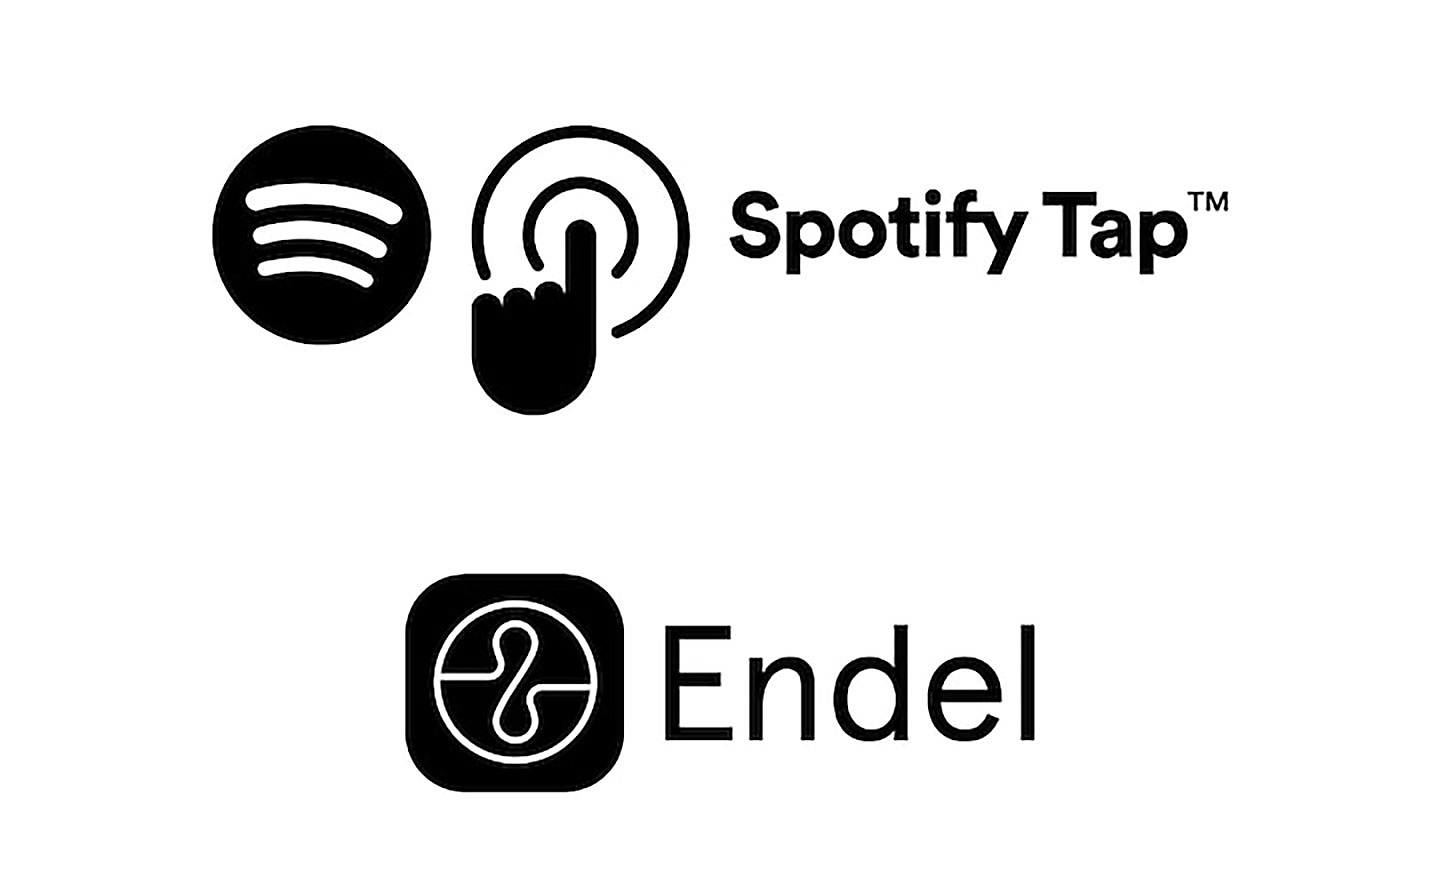 Image of Spotify and Spotify tap logos above an Endel logo